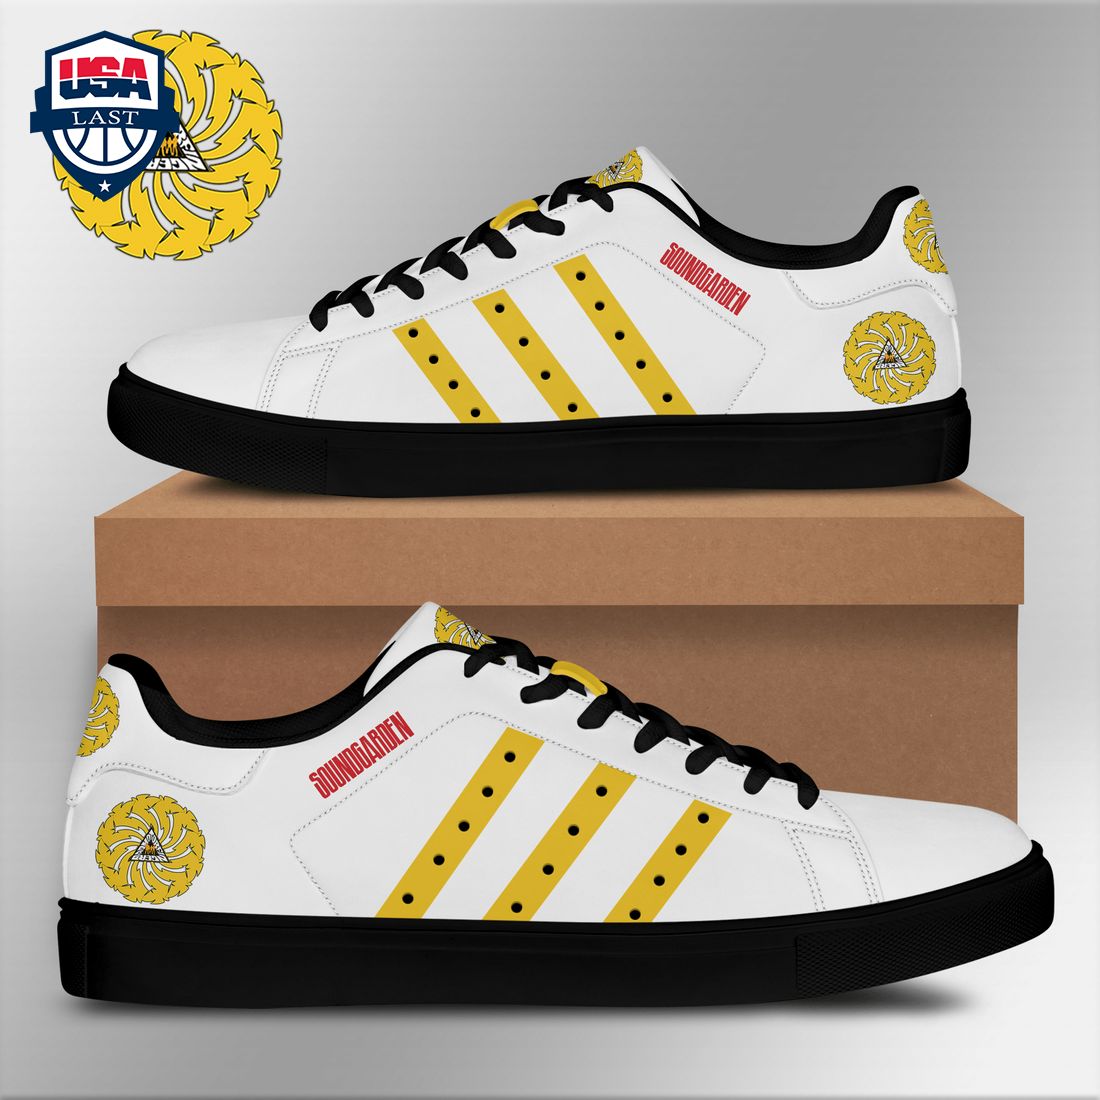 soundgarden-yellow-stripes-style-1-stan-smith-low-top-shoes-1-zxaTY.jpg